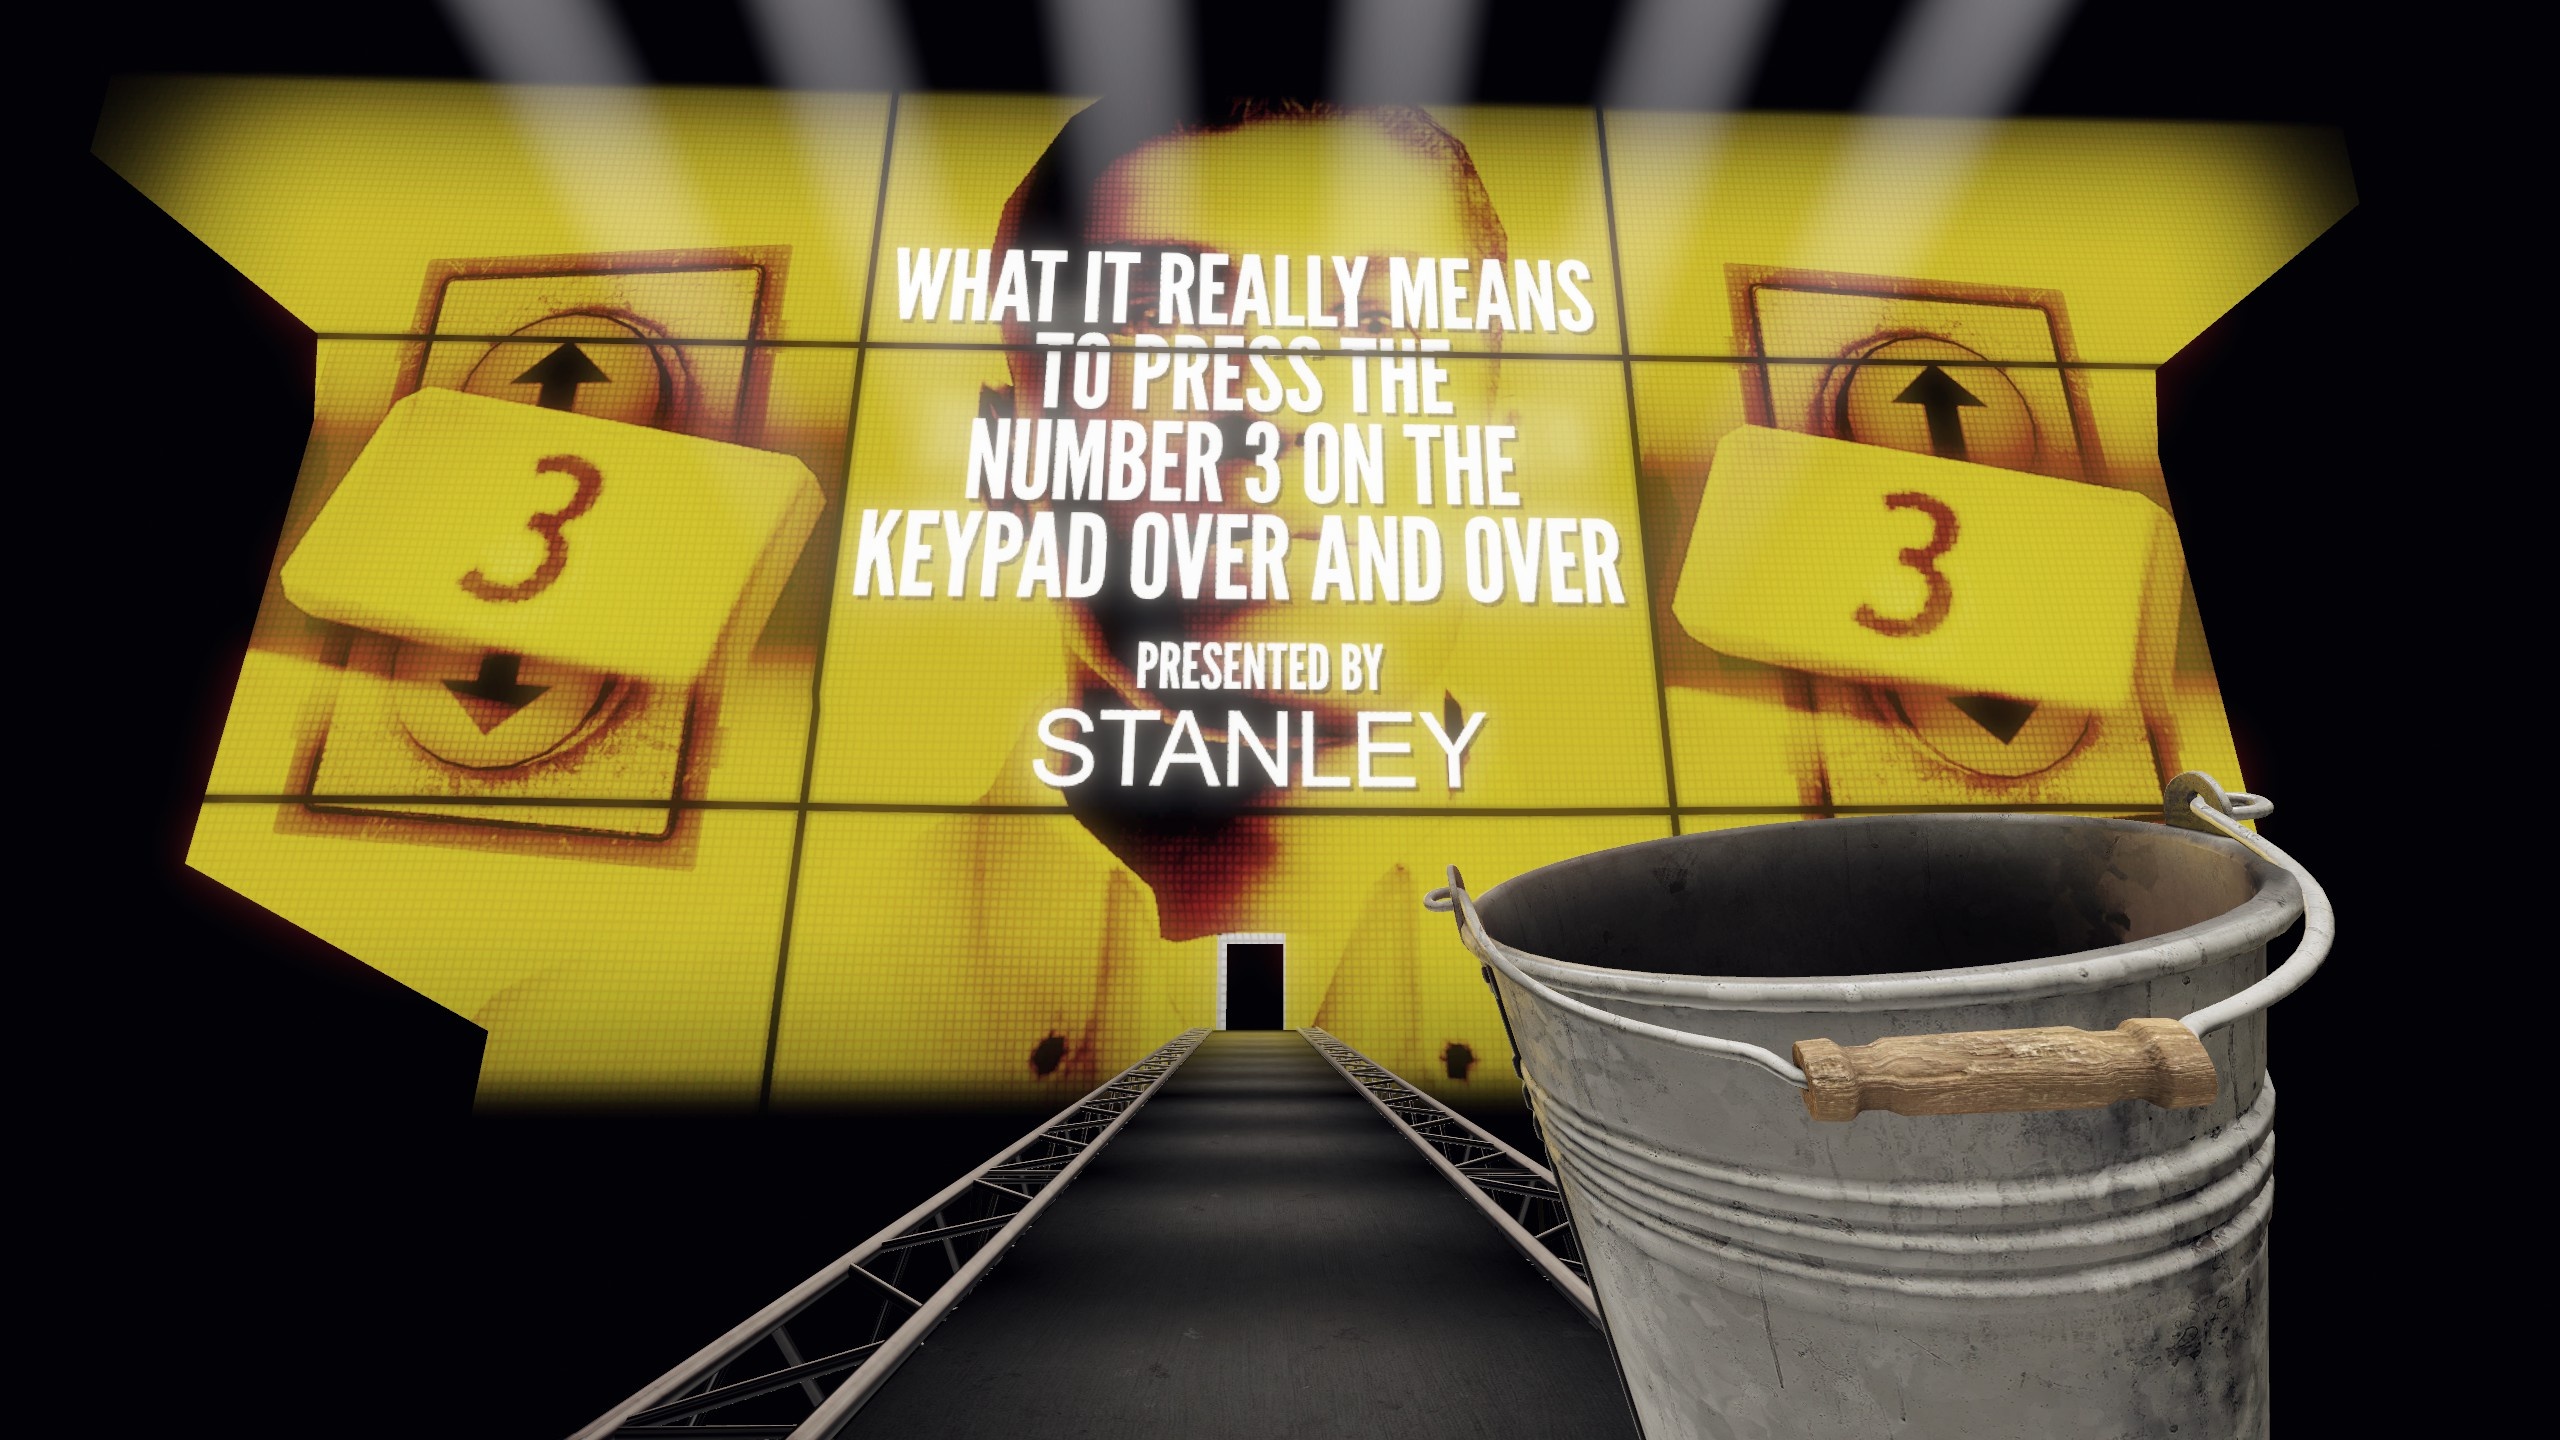 The Stanley Parable Ultra Deluxe: Game made under the Galactic Cafe development name. 2560x1440 HD Wallpaper.